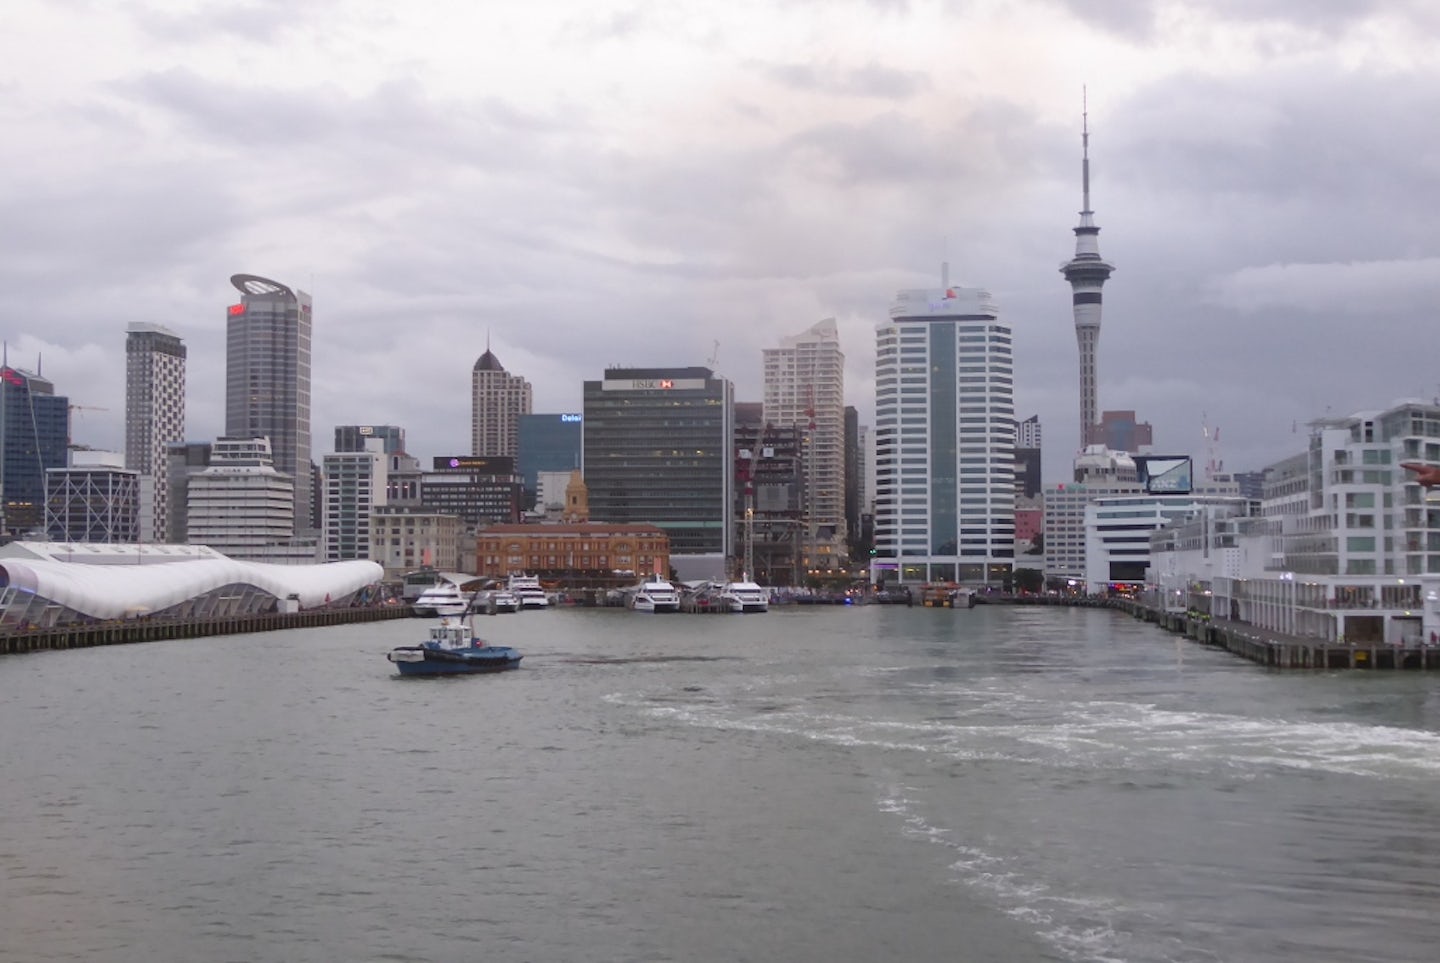 Leaving the port of Auckland